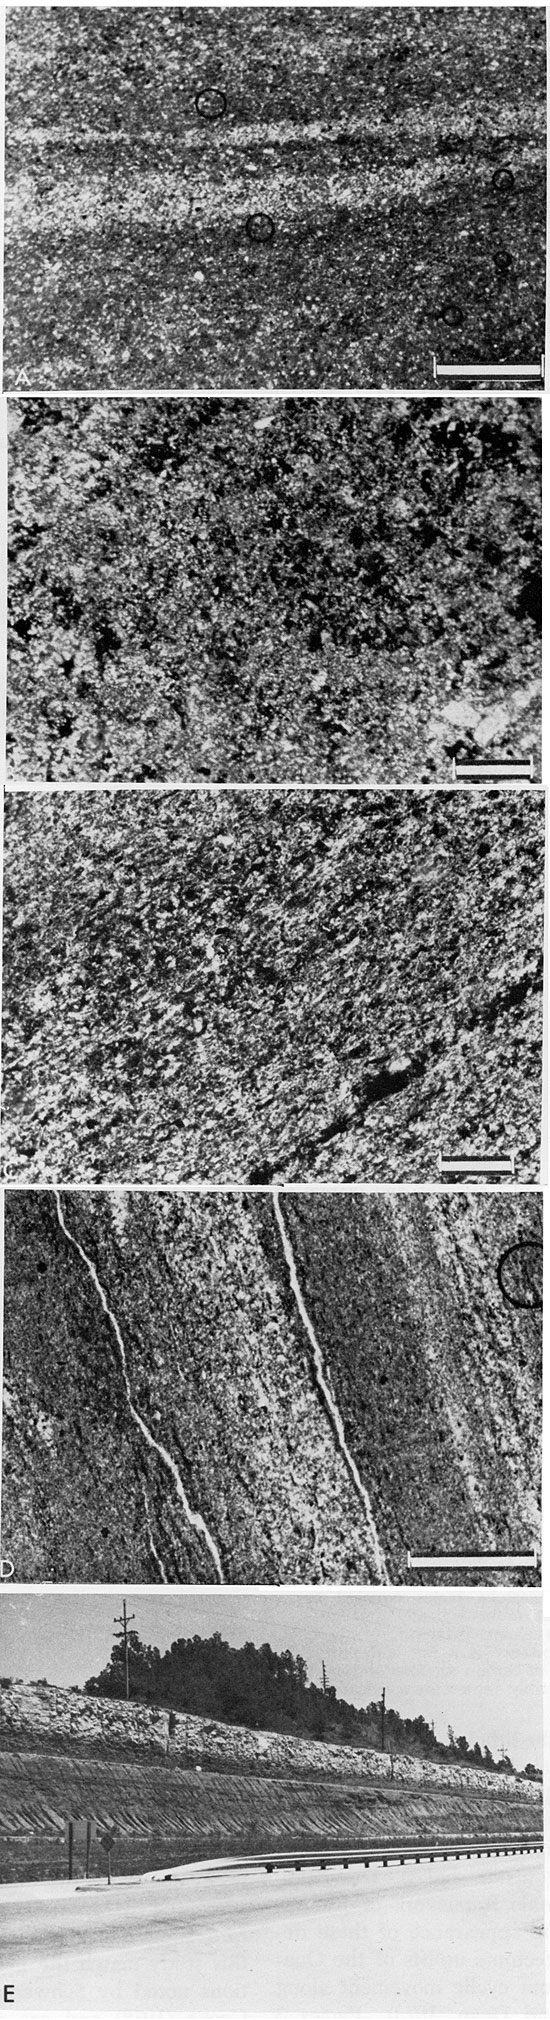 Four black and white photomicrographs and one photo of a typical roadcut where samples were collected.